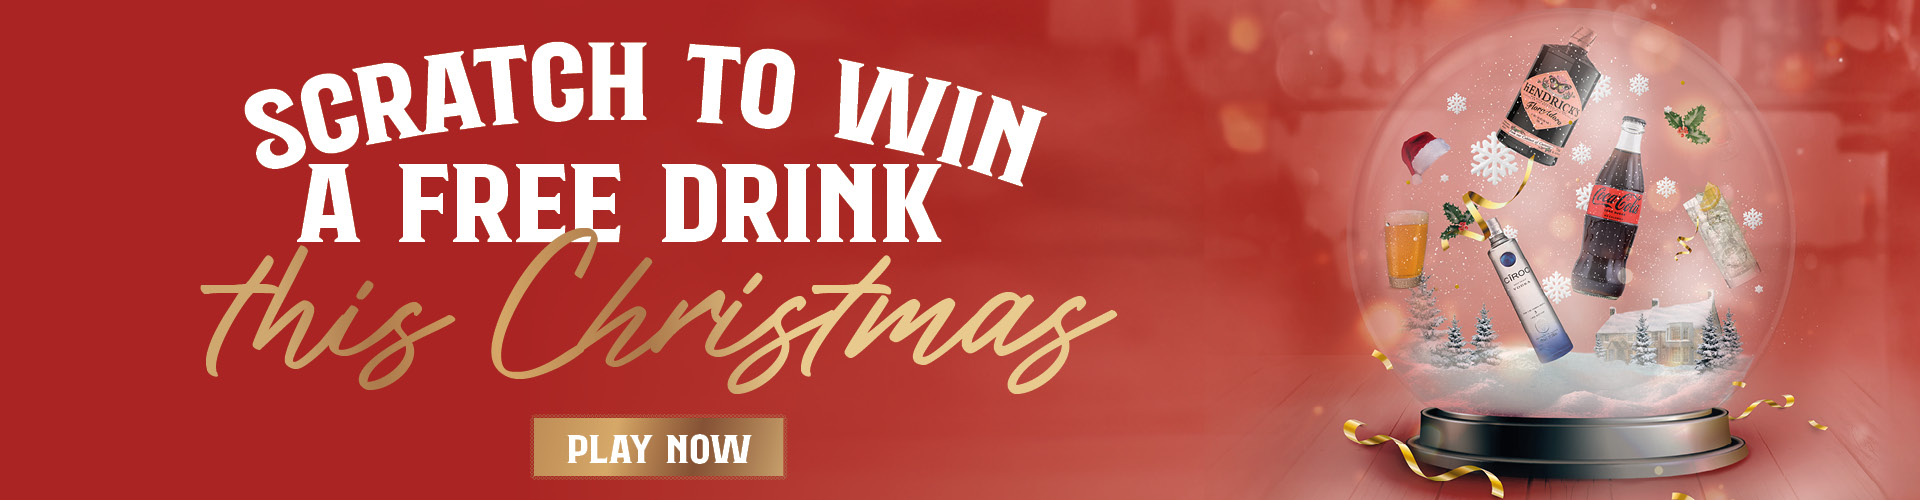 Scratch To Win A Free Drink This Christmas